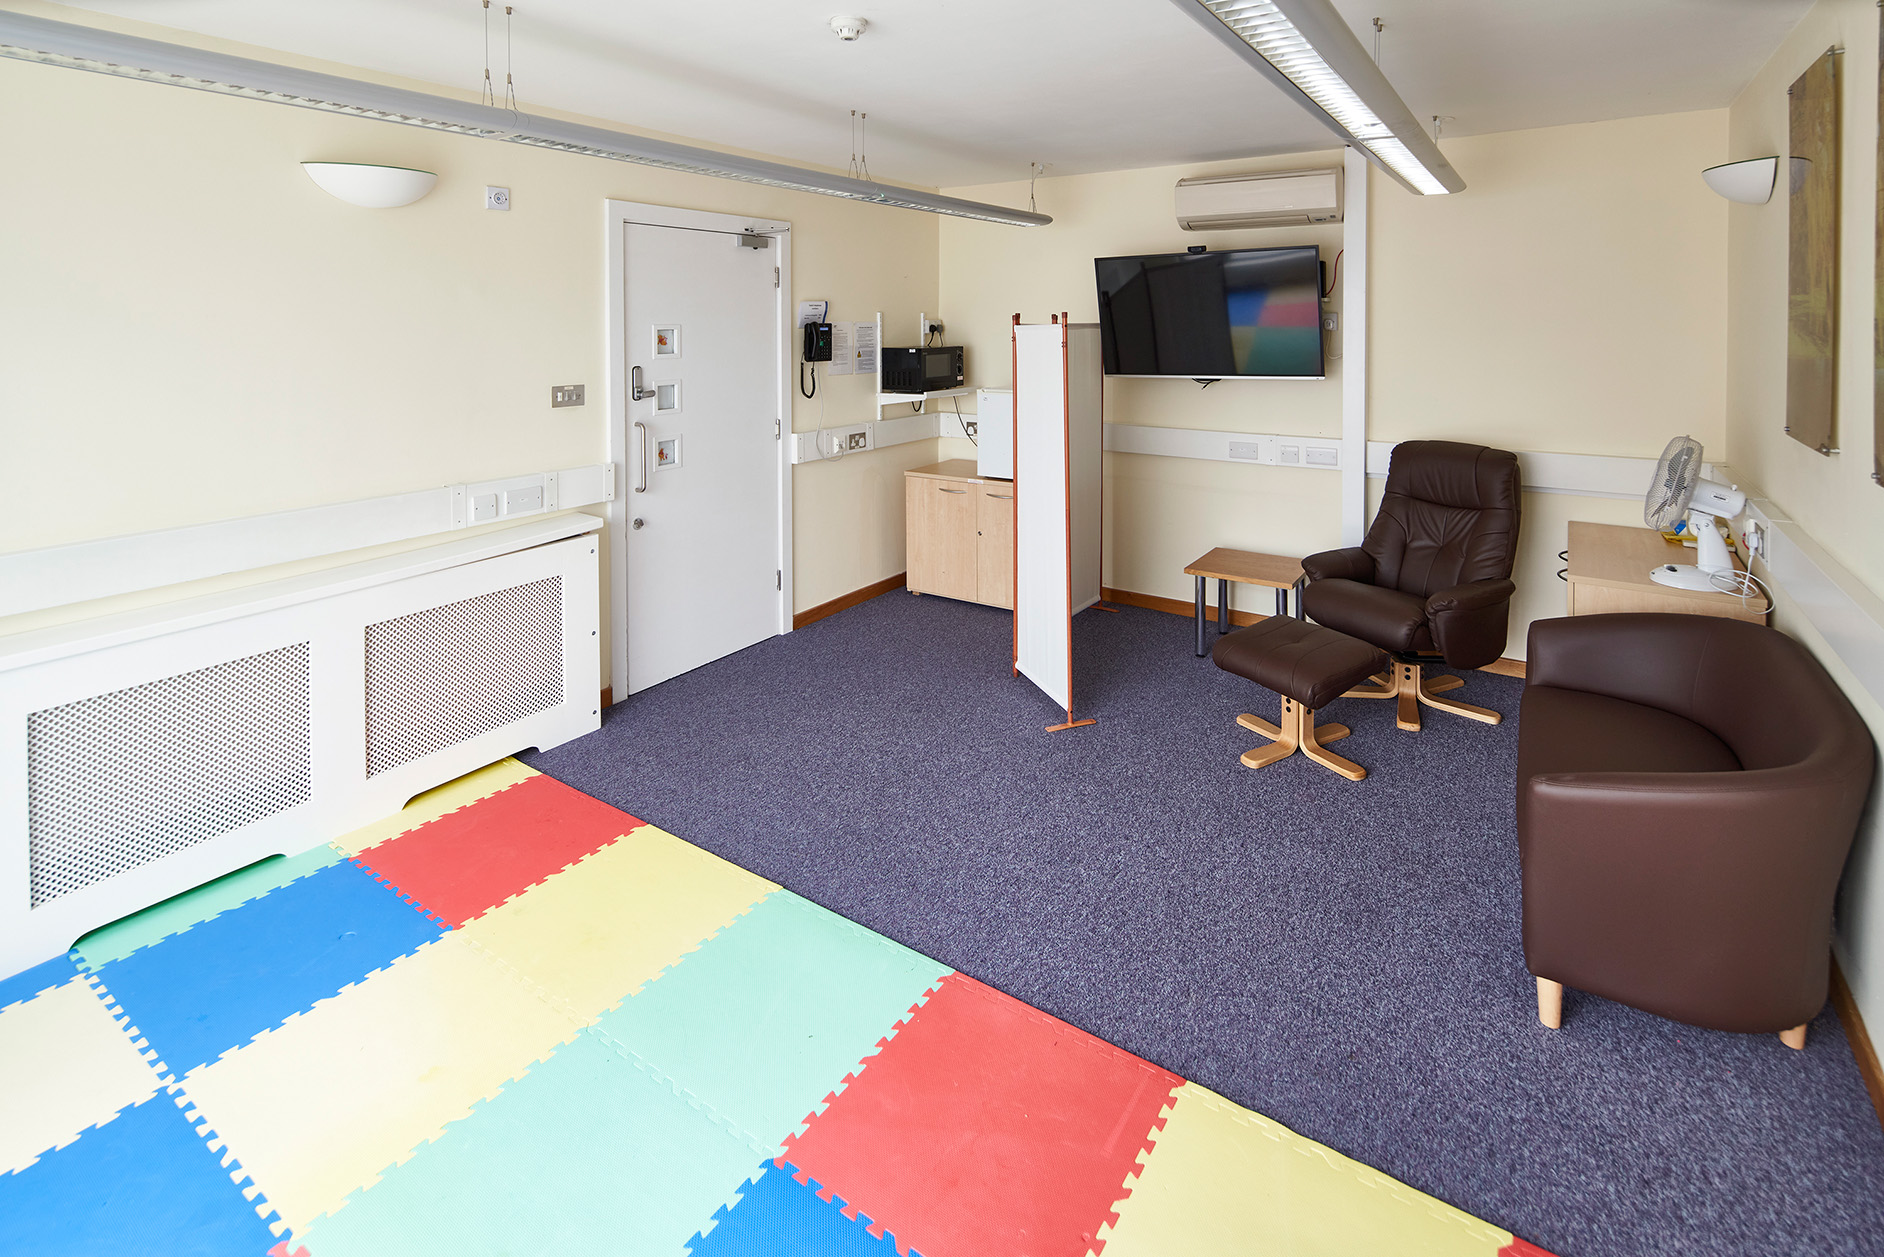 Photo of the Family Room comprising comfortable seating and a padded play area.